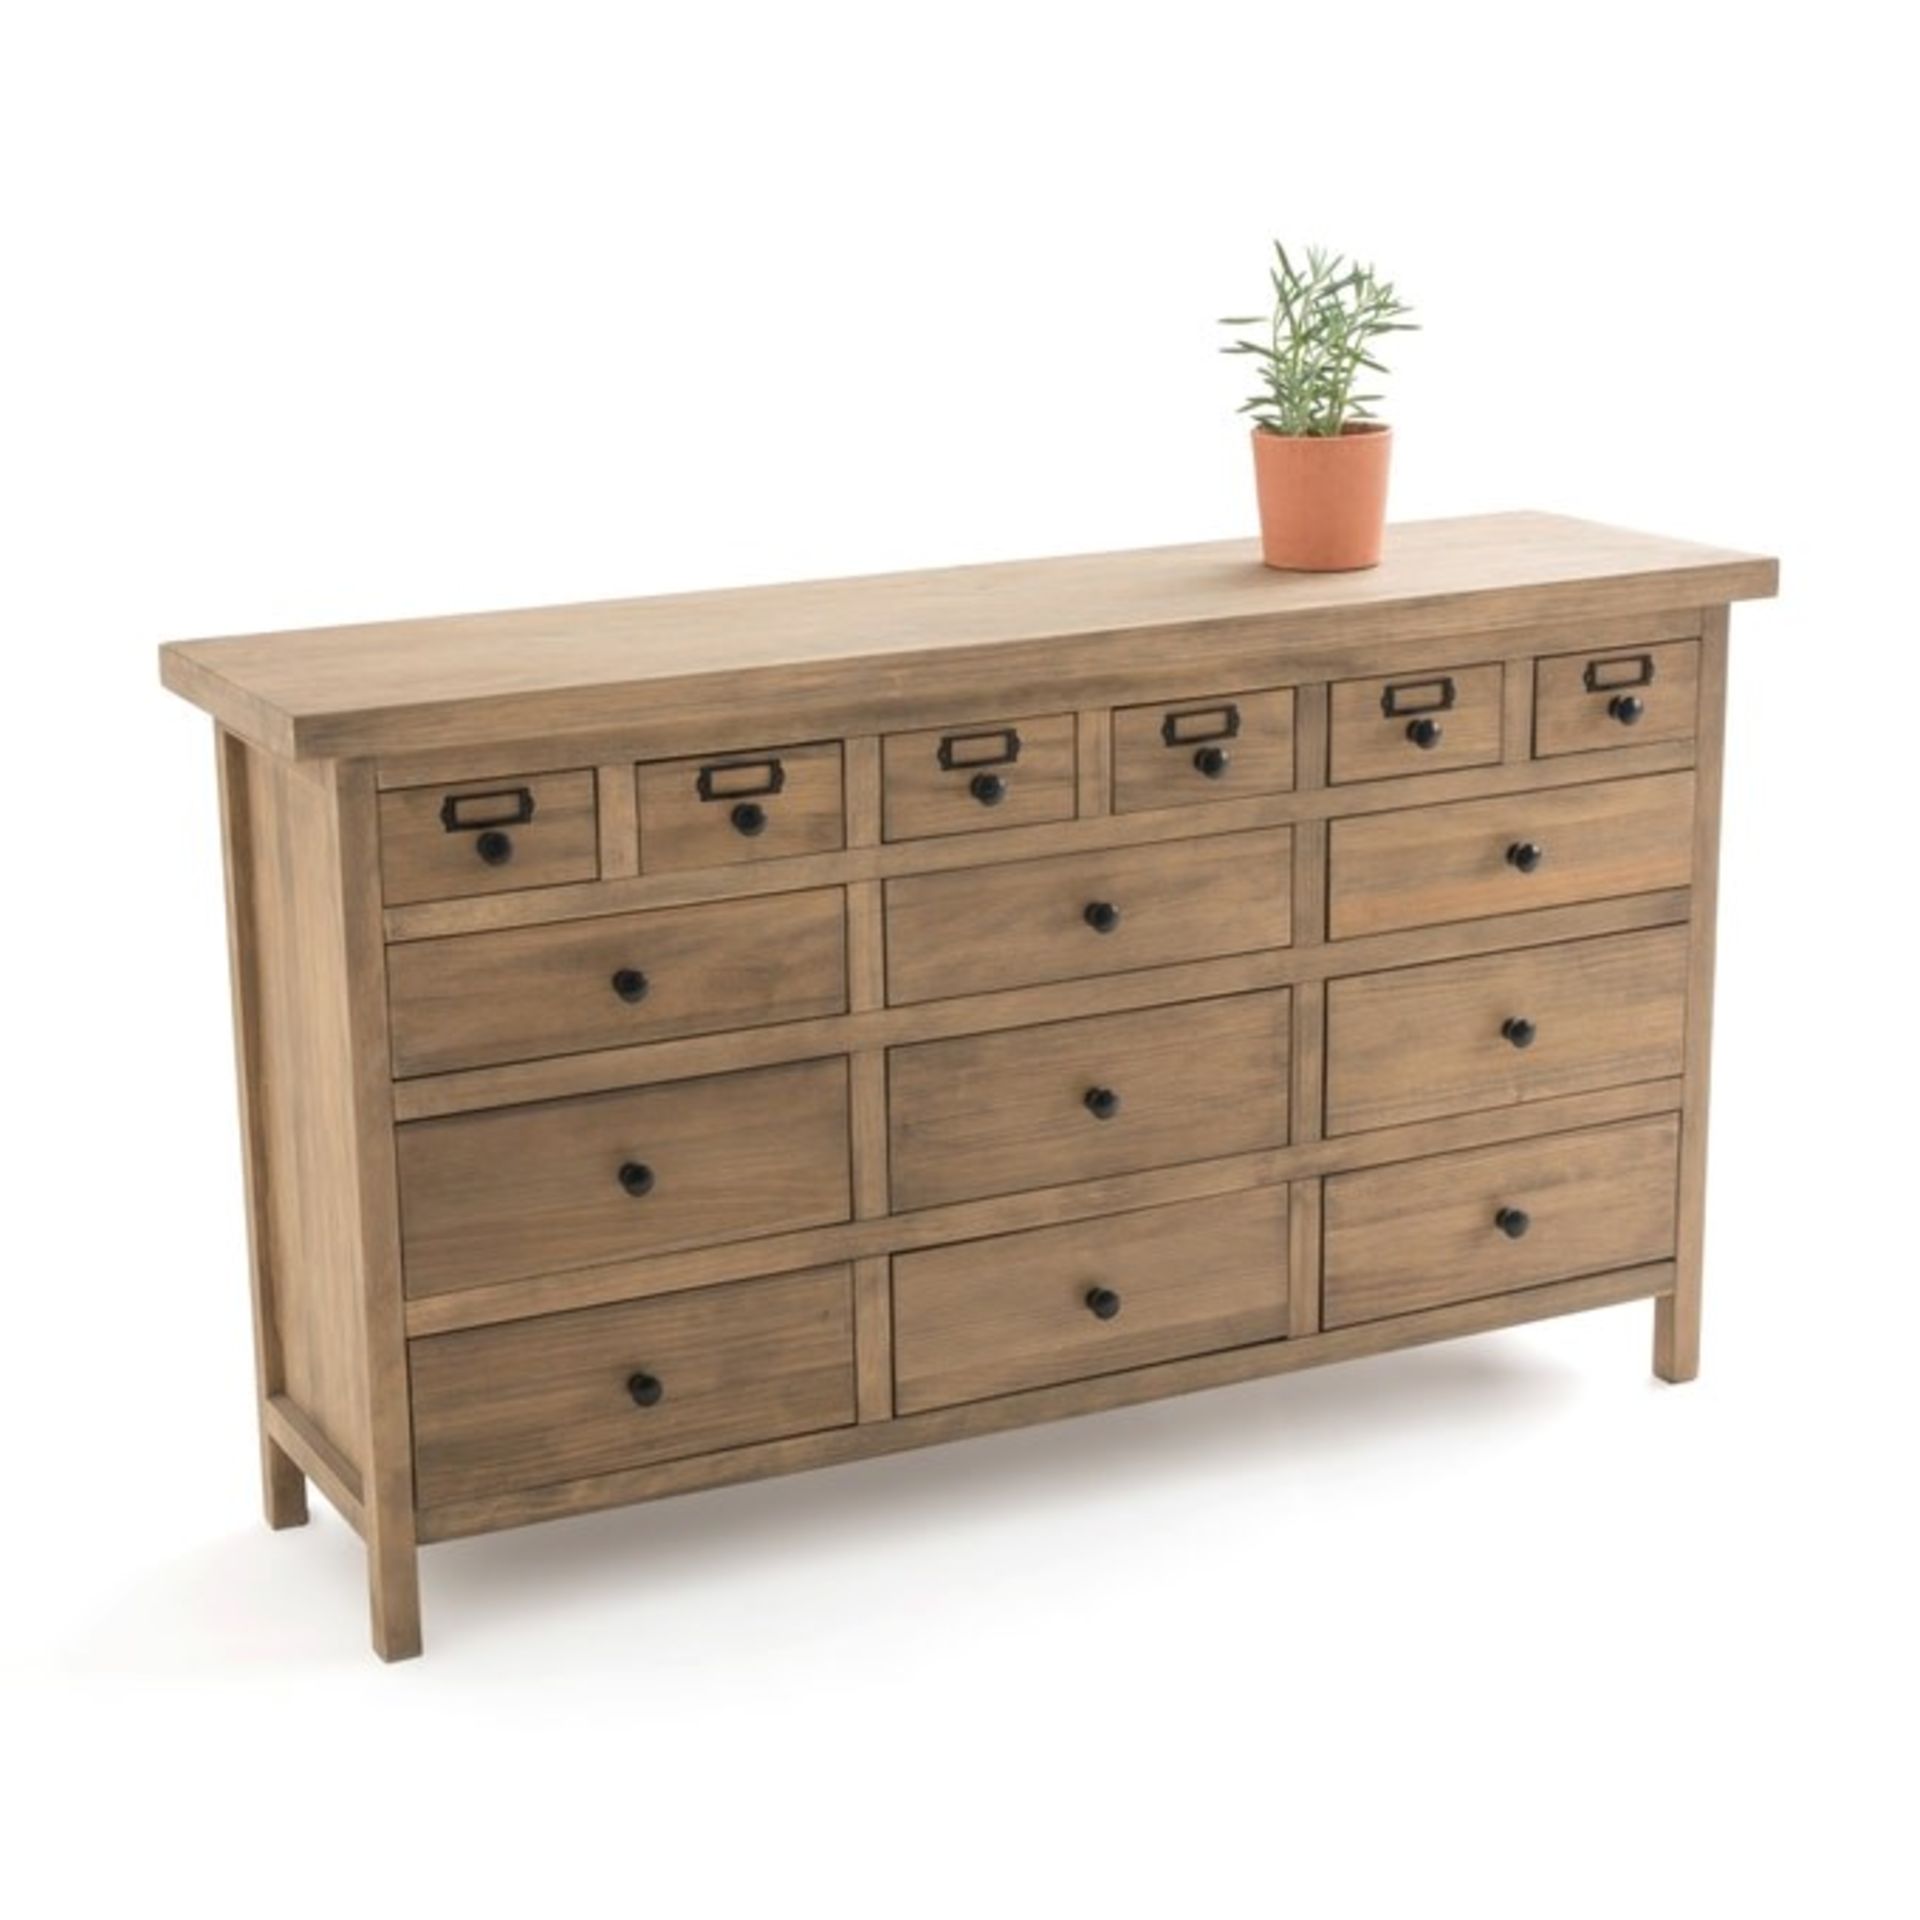 1 GRADE B BOXED LUNJA NATURAL WAXED SIDEBOARD CABINET WITH 15 DRAWERS / RRP £625.00 (PUBLIC